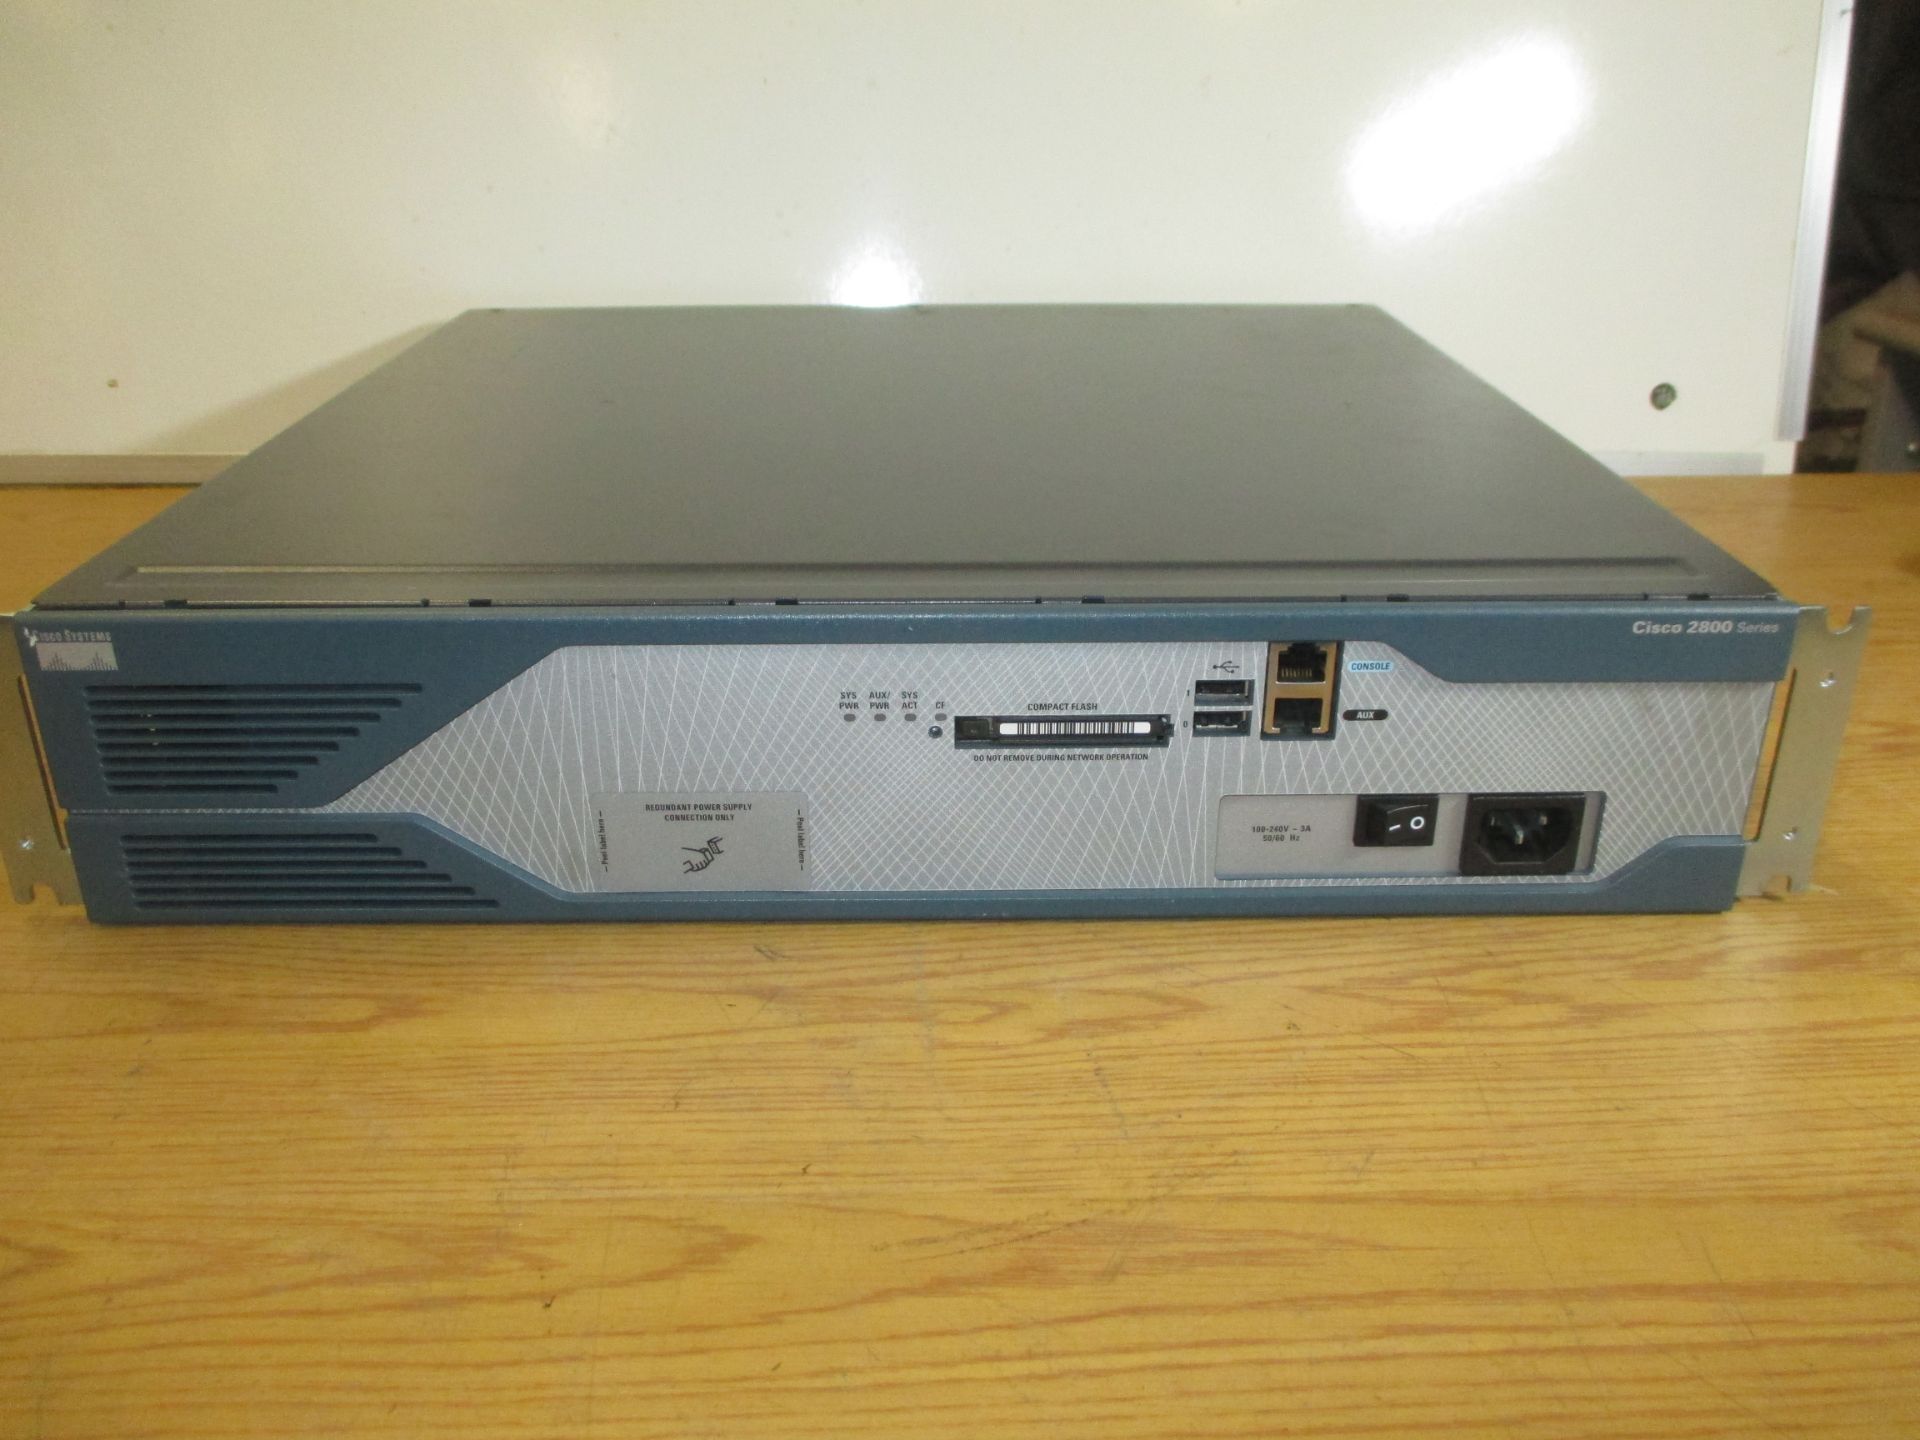 CISCO 2800 SERIES INTEGRATED SERVICES ROUTER. MODEL CISCO2851 V04. WITH 1 X HWIC-1GE-SFP.